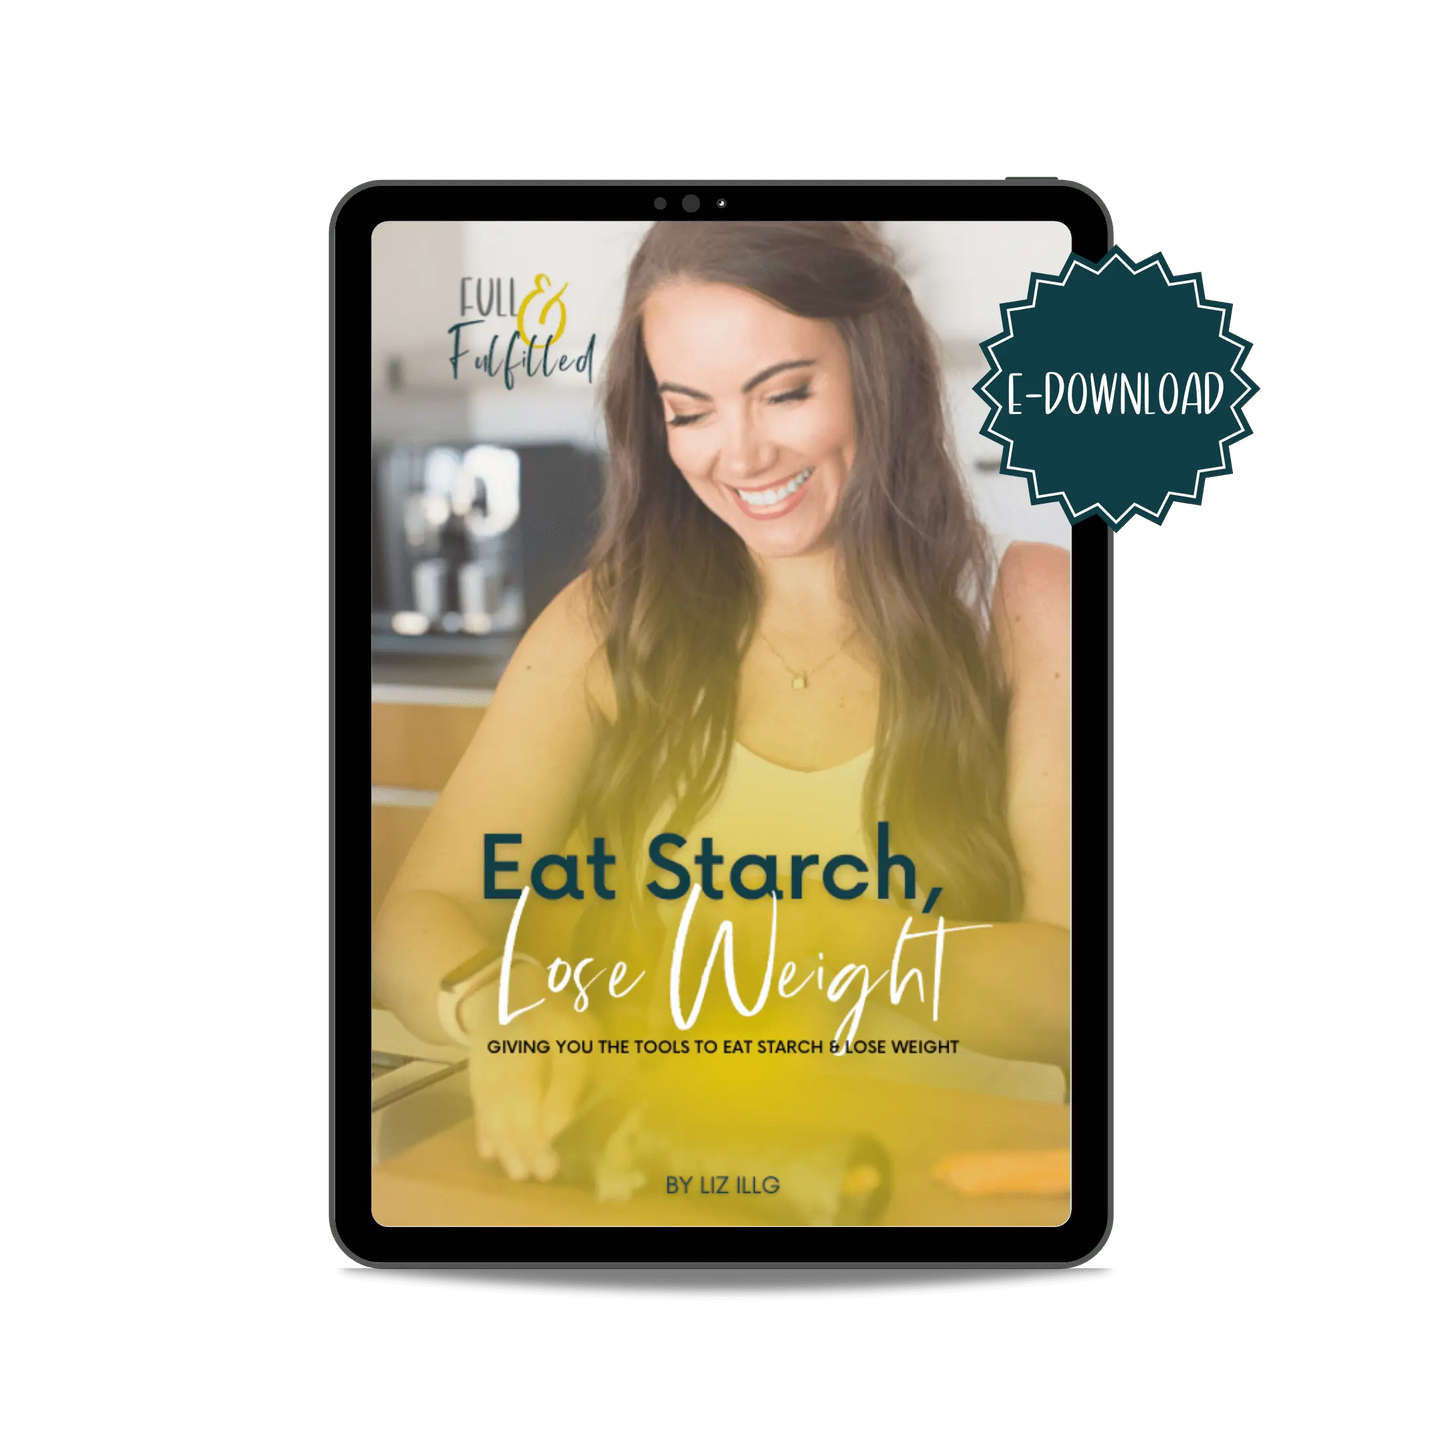 Eat Starch, Lose Weight by Liz fullandfulfilled 50 50 plate 50/50 bowl starch solution McDougall Program 5050 diet wfpb vegan plant based E-Download fullandfulfilled